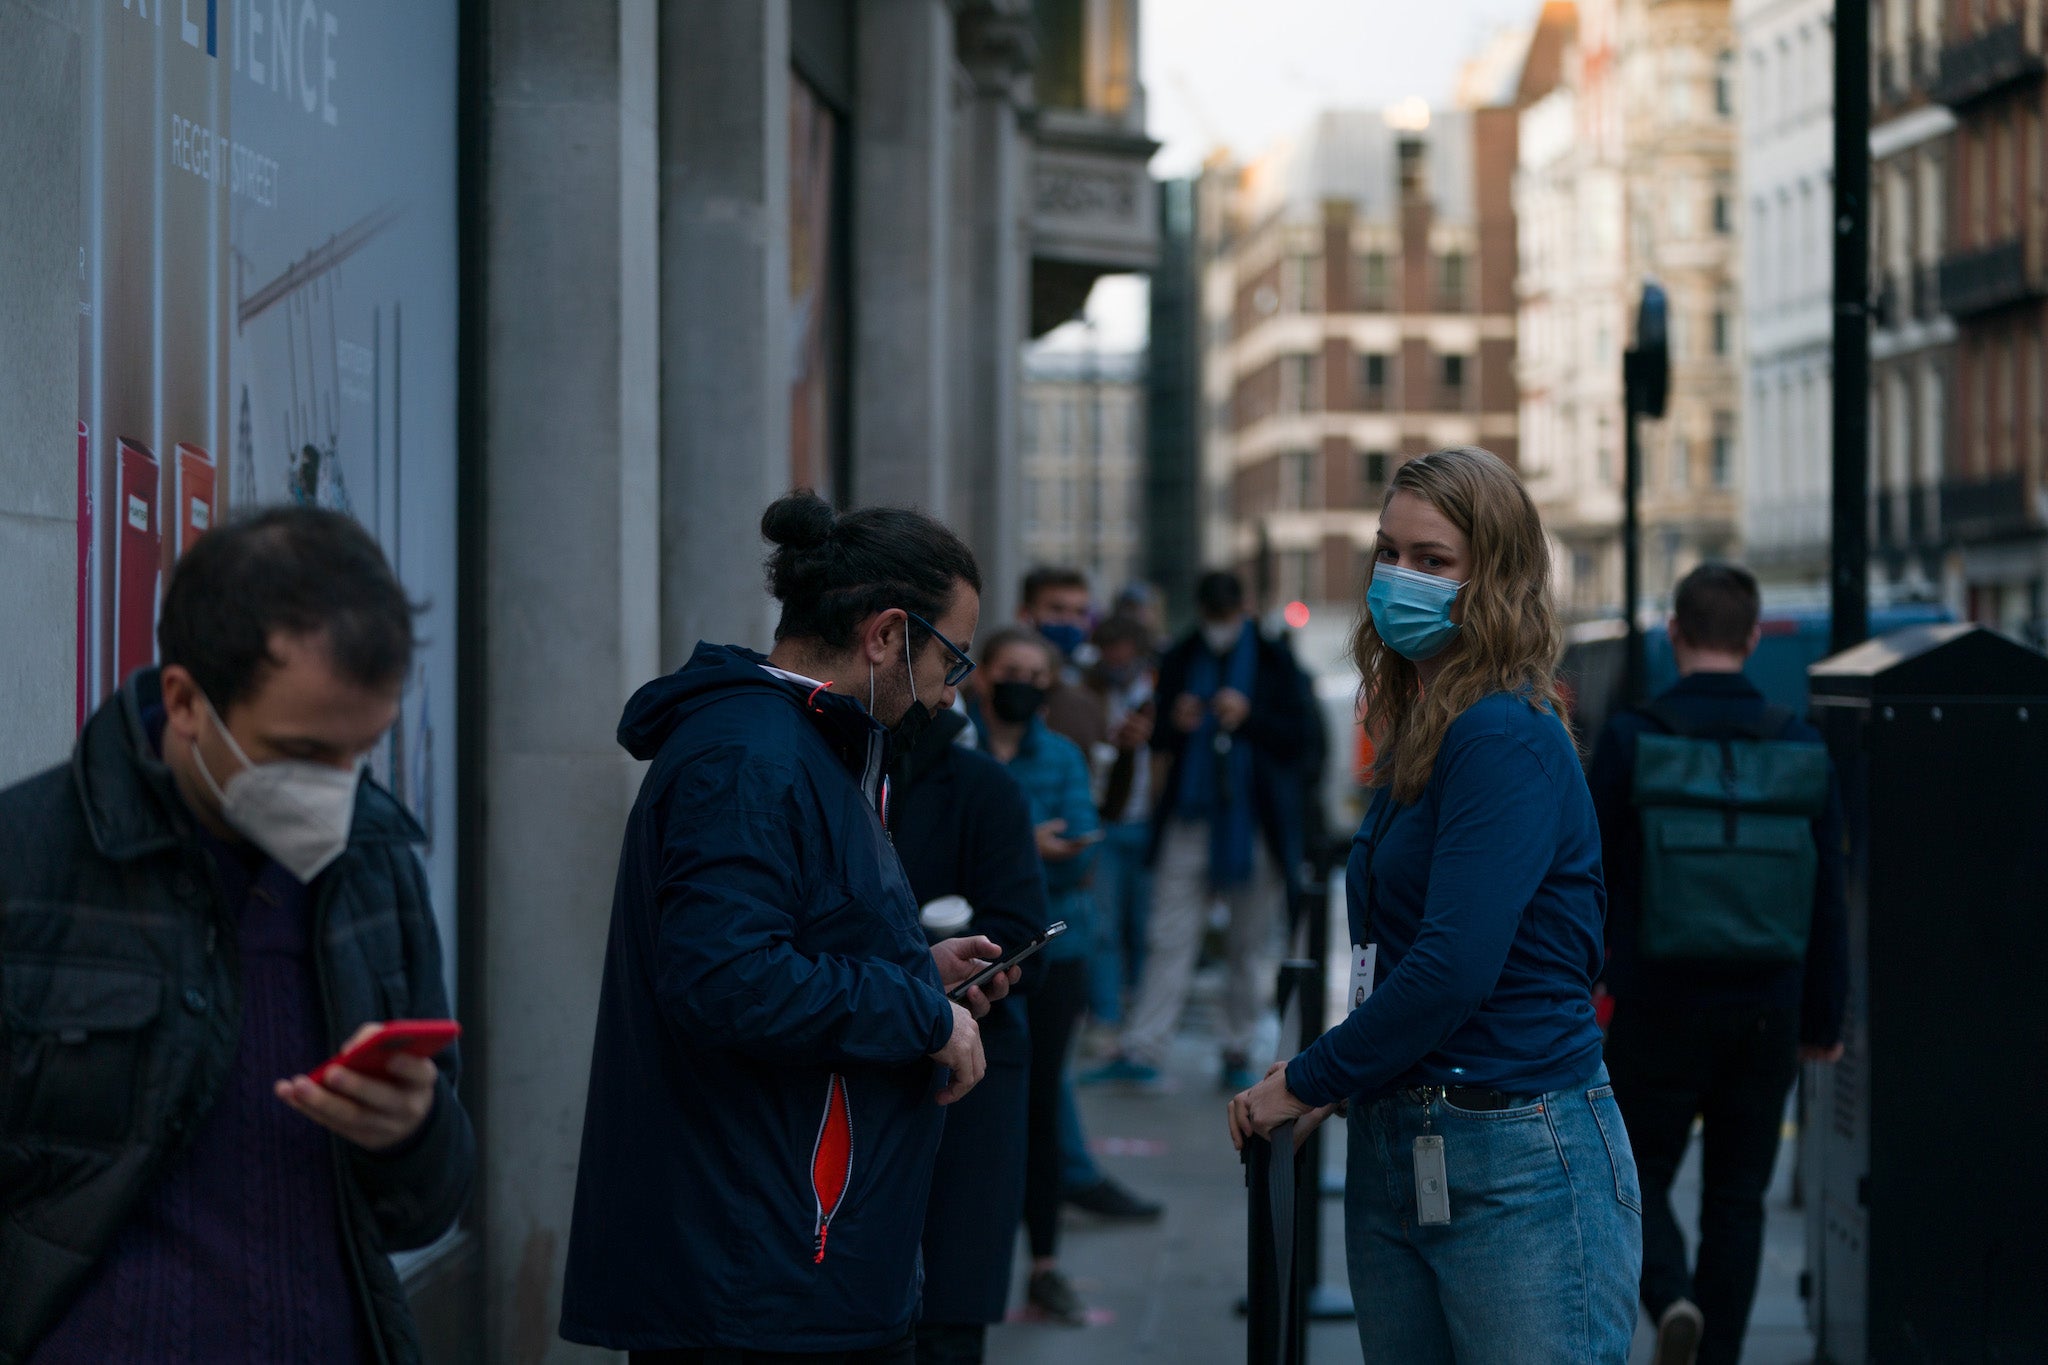 Customers socially distance as they queue for the new iPhone 12 and iPhone 12 Pro on launch day on October 23 in London